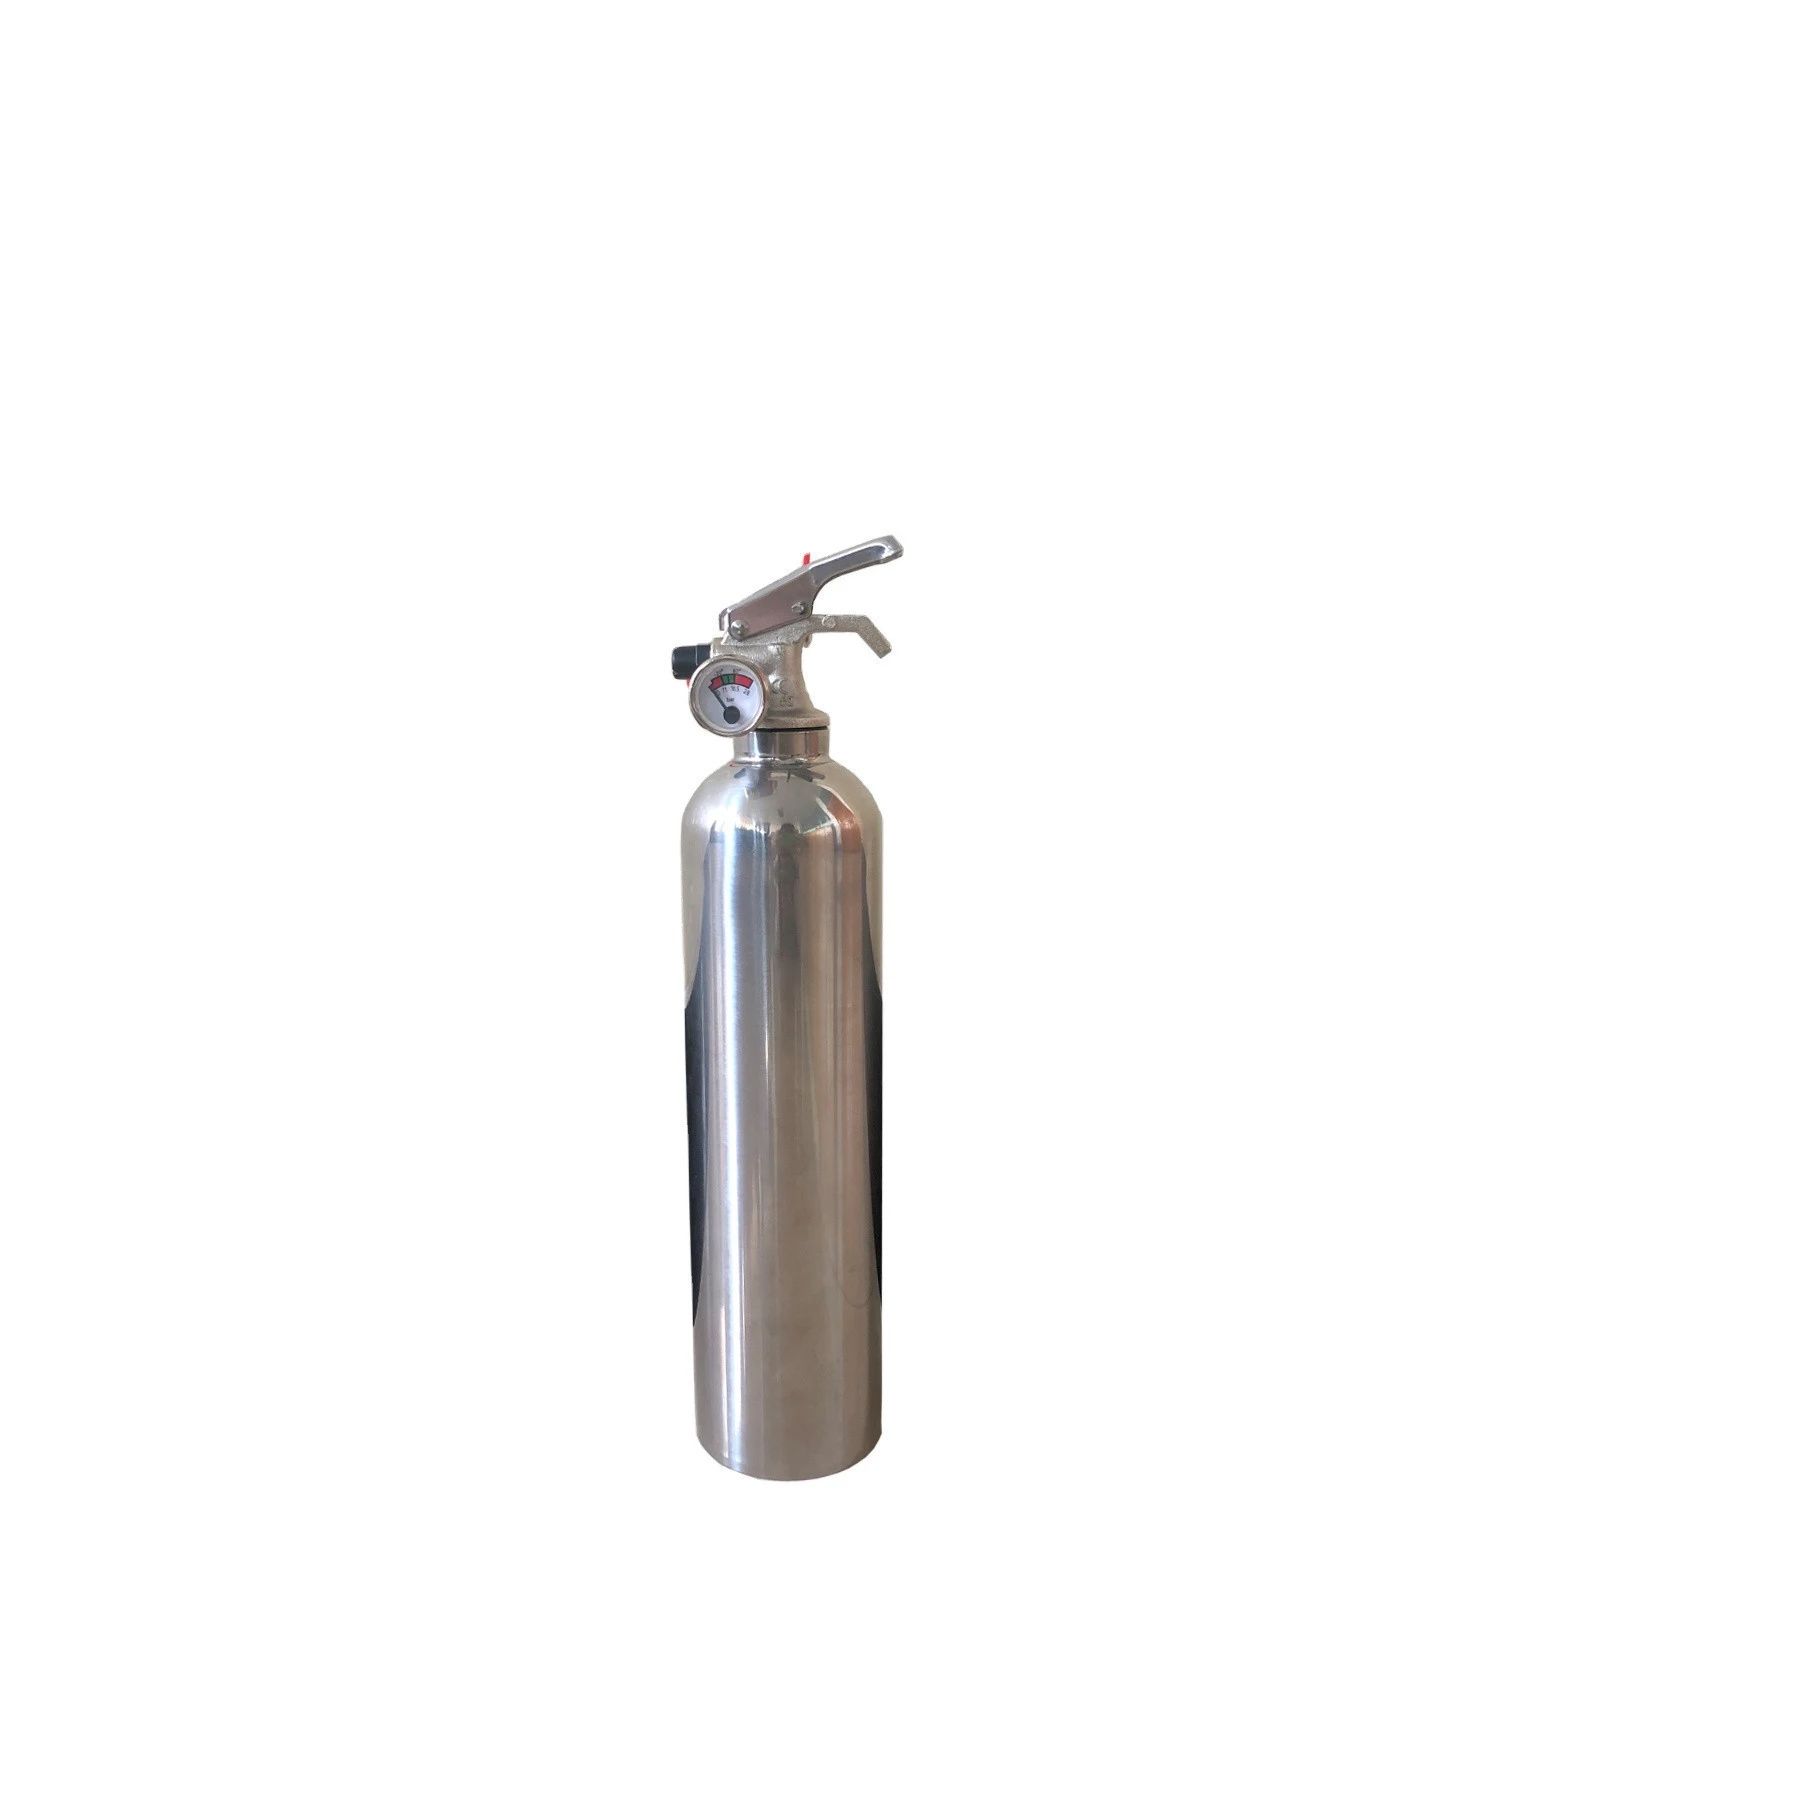 1KG portable stainless steel abc fire extinguisher empty/cylinder for fire stop